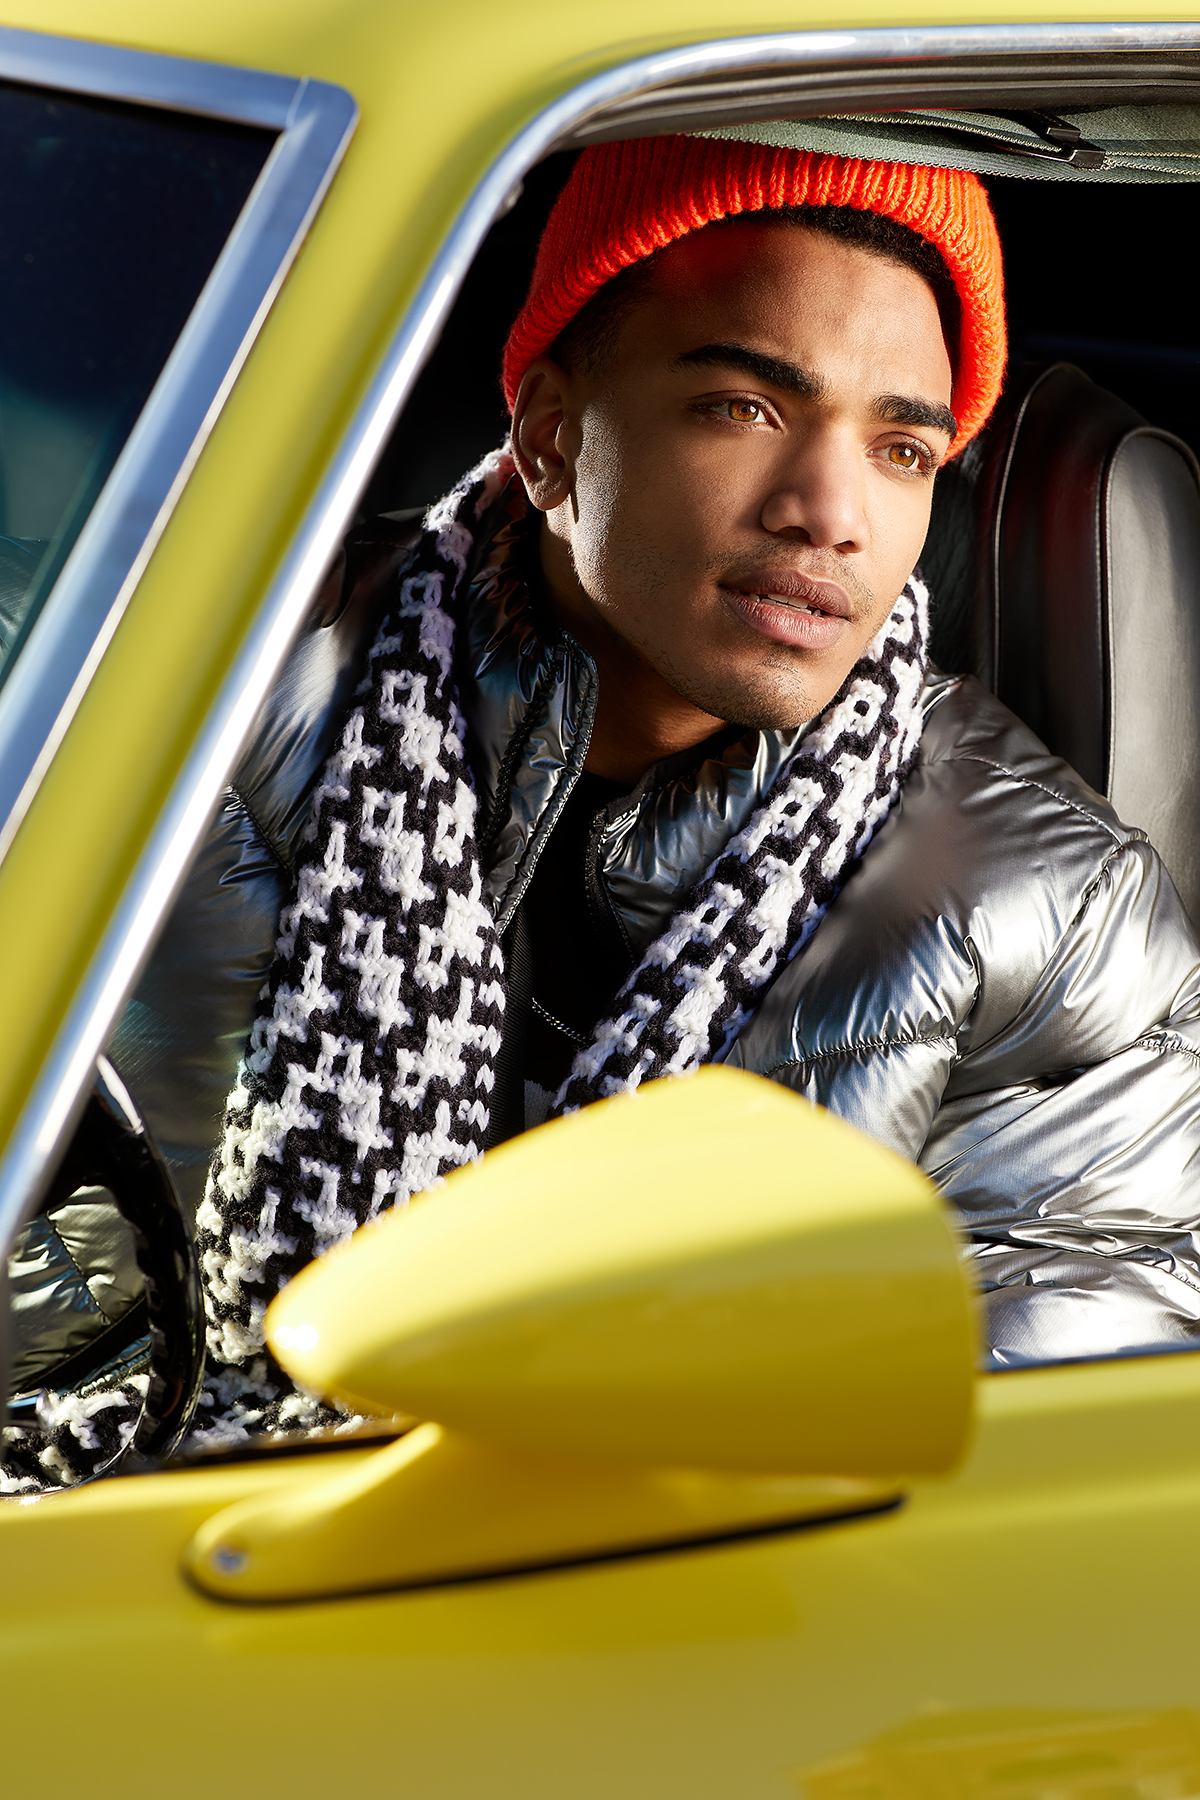 commercial lifestyle photography of man in yellow car with black and white scarf and orange knitted hatman in yellow car